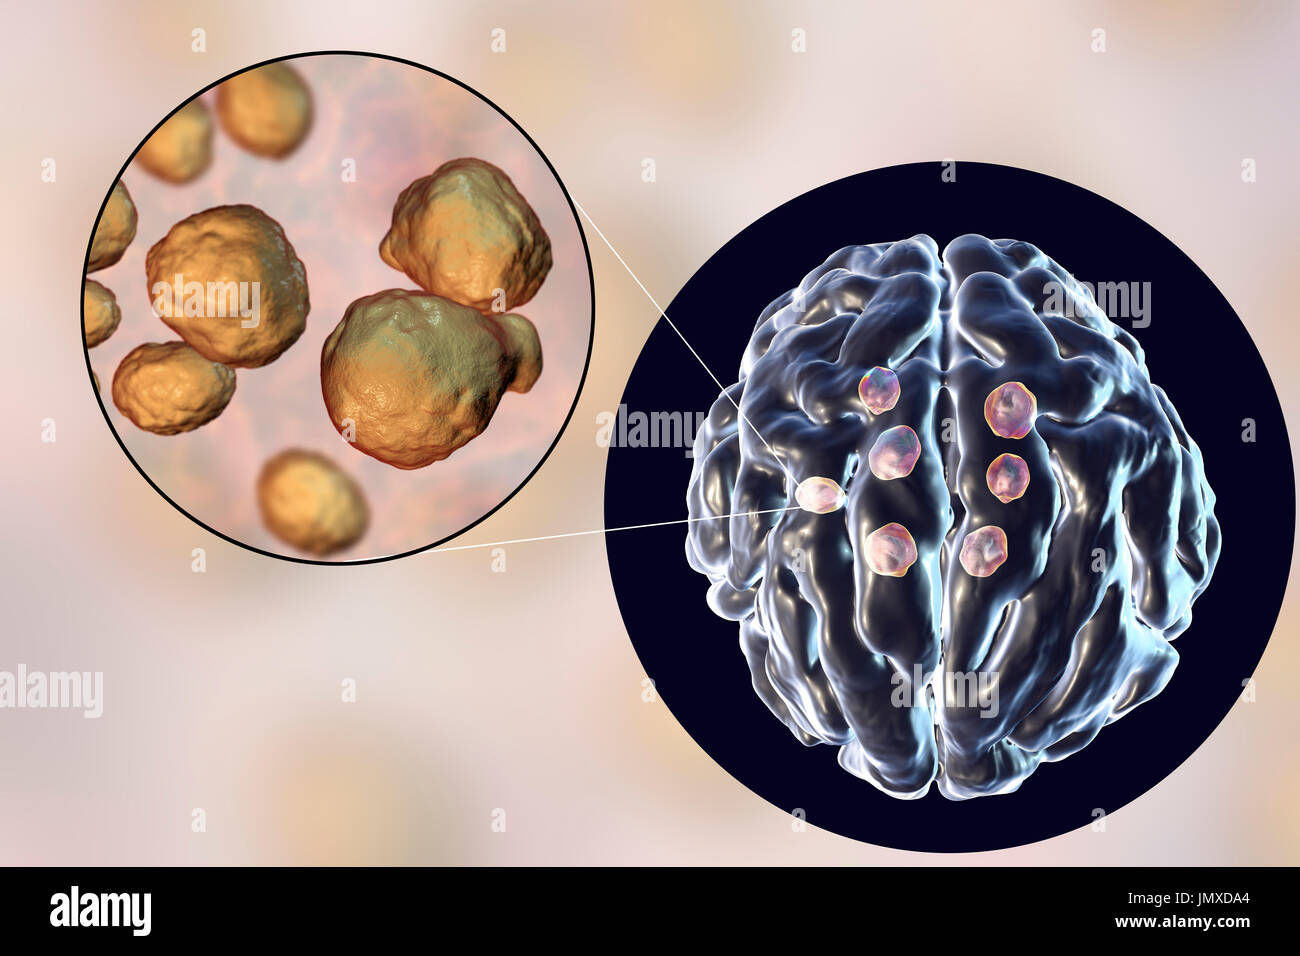 Cryptococcal brain lesions. Illustration of multiple brain parenchyma lesions caused by the fungus Cryptococcus neoformans and a close-up view of the fungus. C. neoformans is a yeast-like organism. Cryptococcosis is a rare infection that affects people with a deficient immune system such as in AIDS (acquired immunodeficiency syndrome). It is caused by inhaling the fungus found in soil contaminated by pigeon droppings. Infection may cause meningitis, or single or multiple lesions in brain parenchyma. Cryptococcus neoformans var. gattii more commonly produces parenchyma lesions while Stock Photo